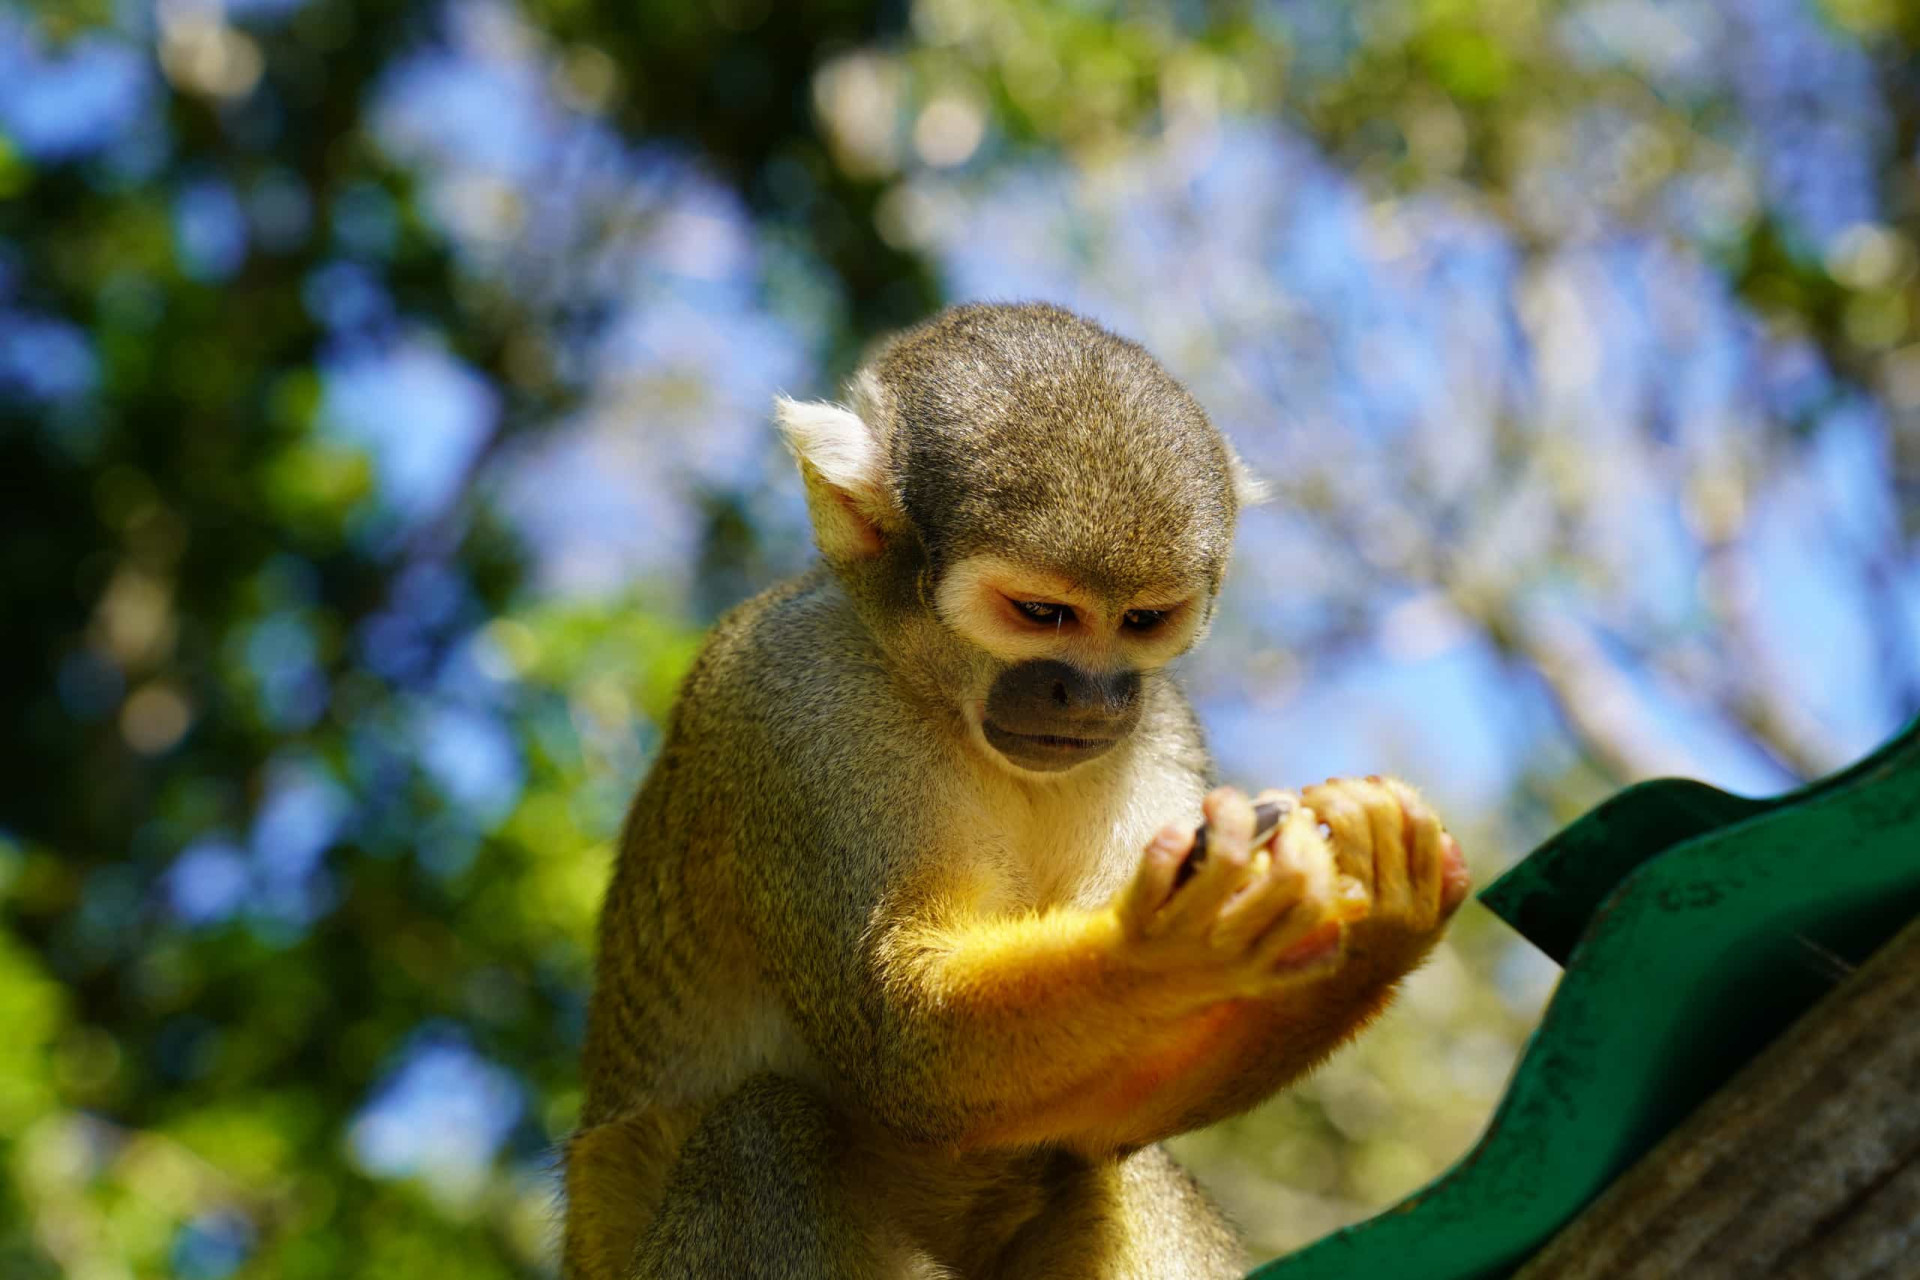 <p>Families of seriously happy primates scamper and jostle in carefree abandon at this family-friendly attraction, the Monkey Jungle "where the humans are caged and the monkeys run wild."</p><p>You may also like:<a href="https://www.starsinsider.com/n/340245?utm_source=msn.com&utm_medium=display&utm_campaign=referral_description&utm_content=198095v22en-en"> The final goodbye to our beloved pets</a></p>